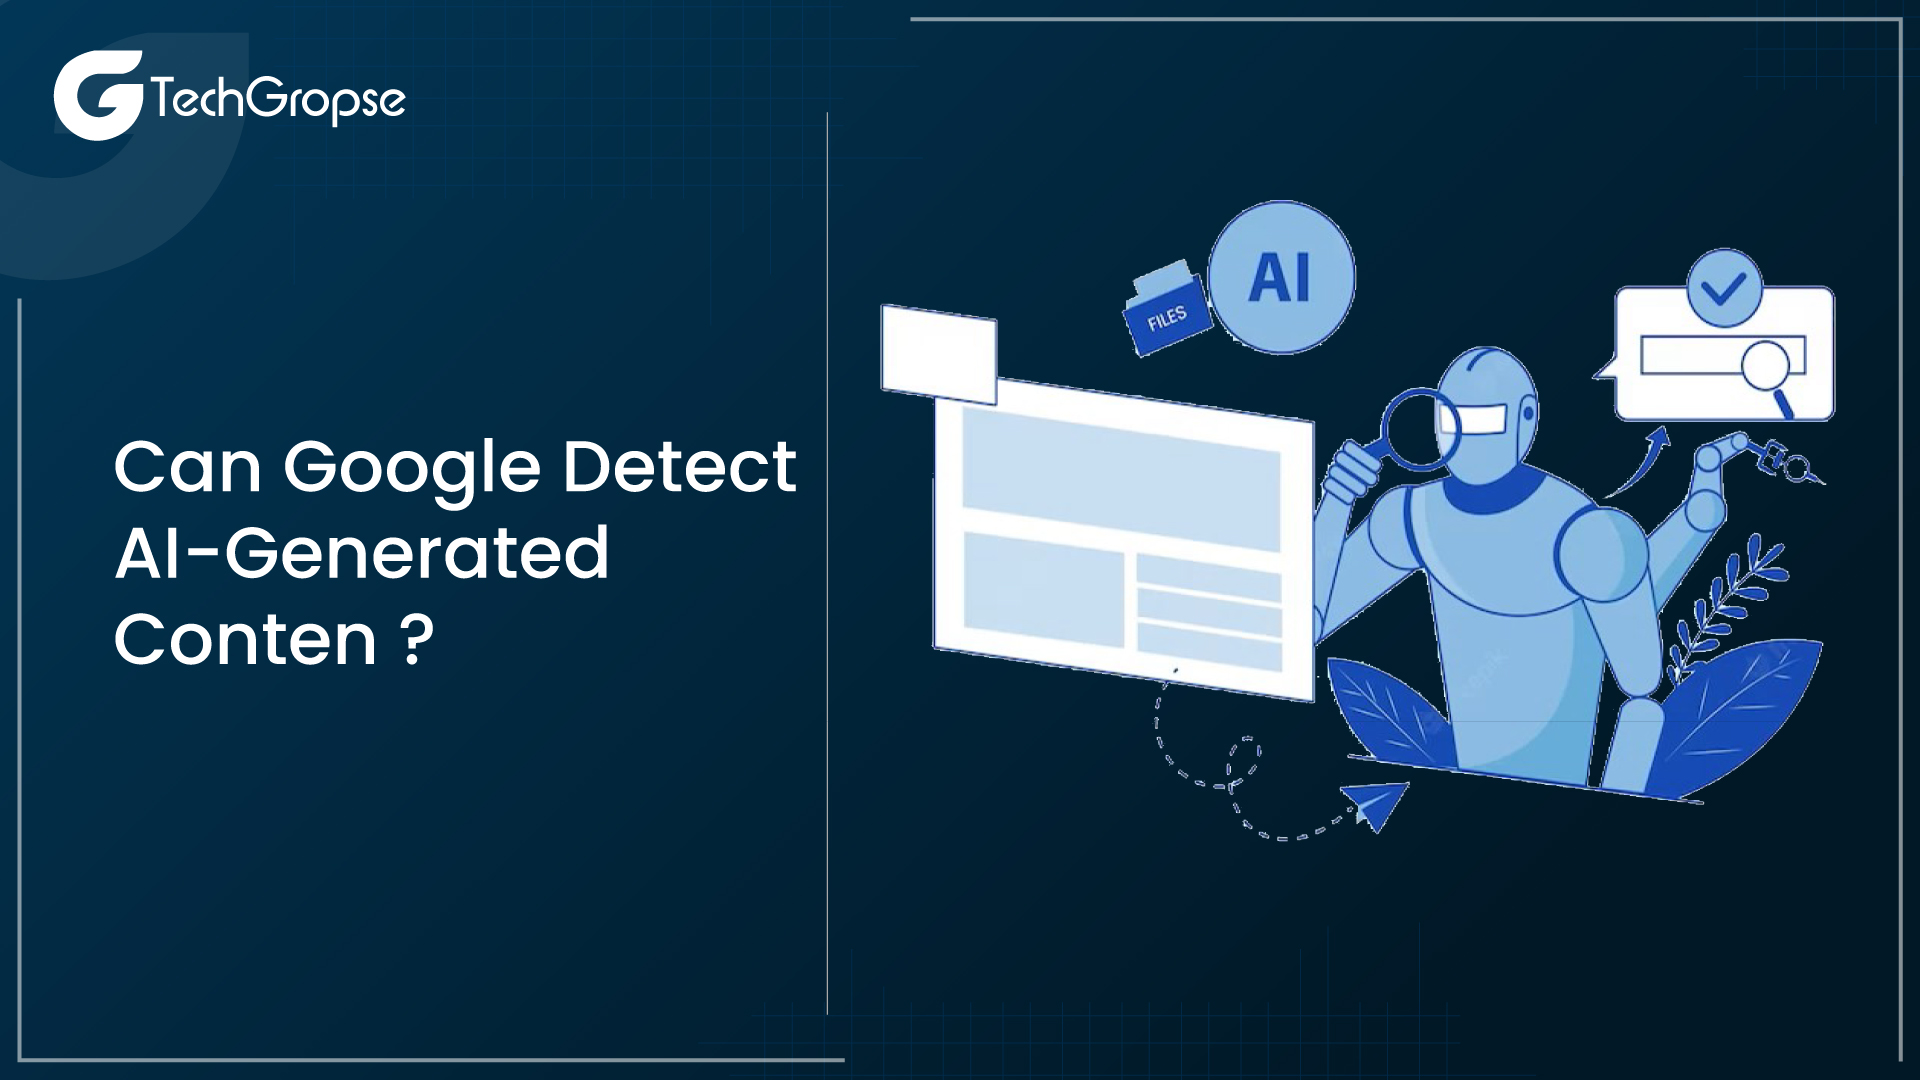 Can Google Detect AI Generated Content